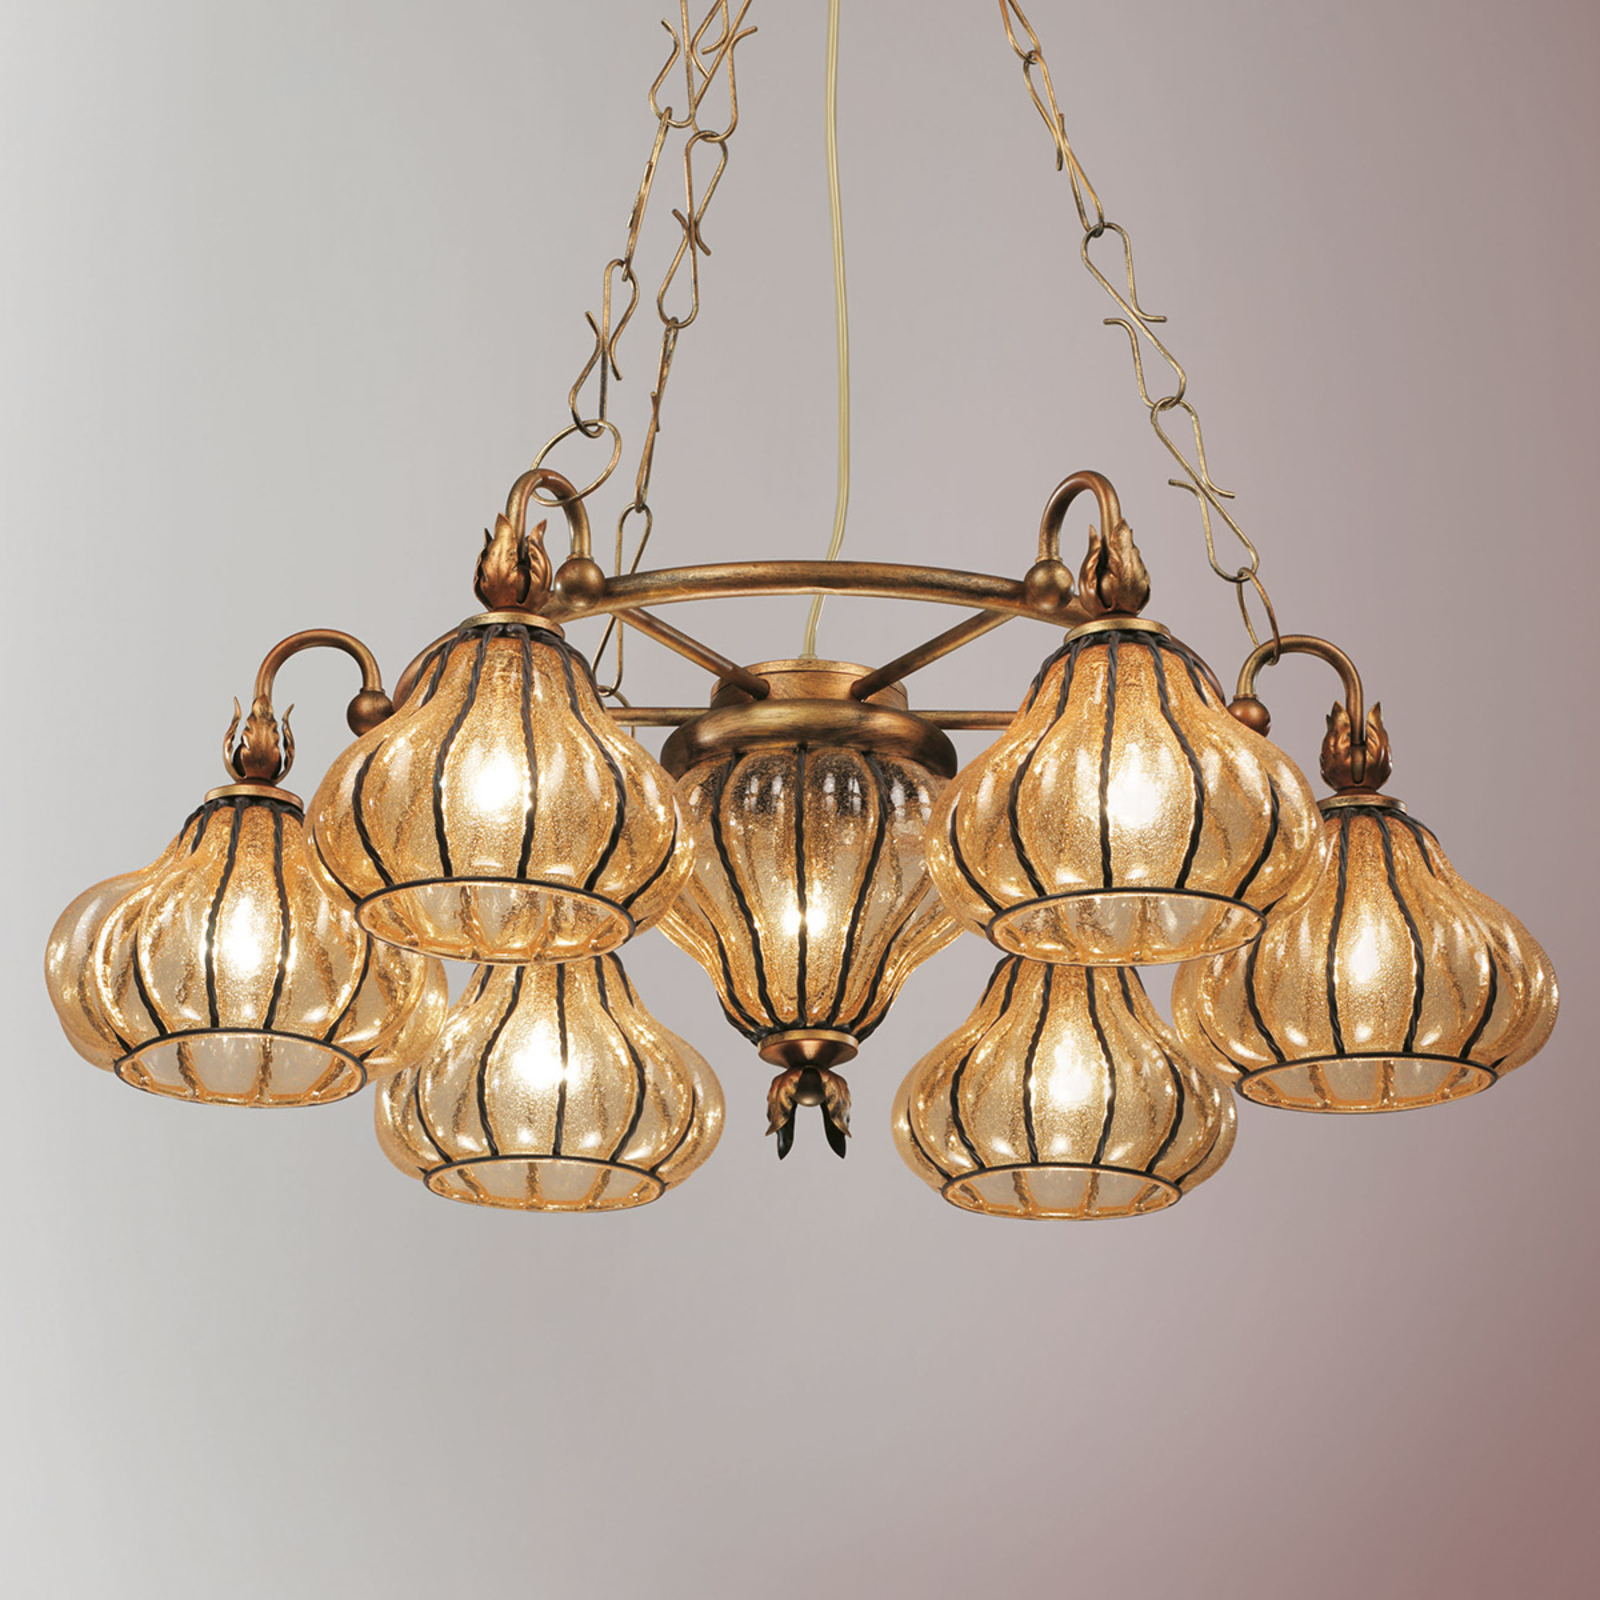 Carro hanging light with seven glass lampshades